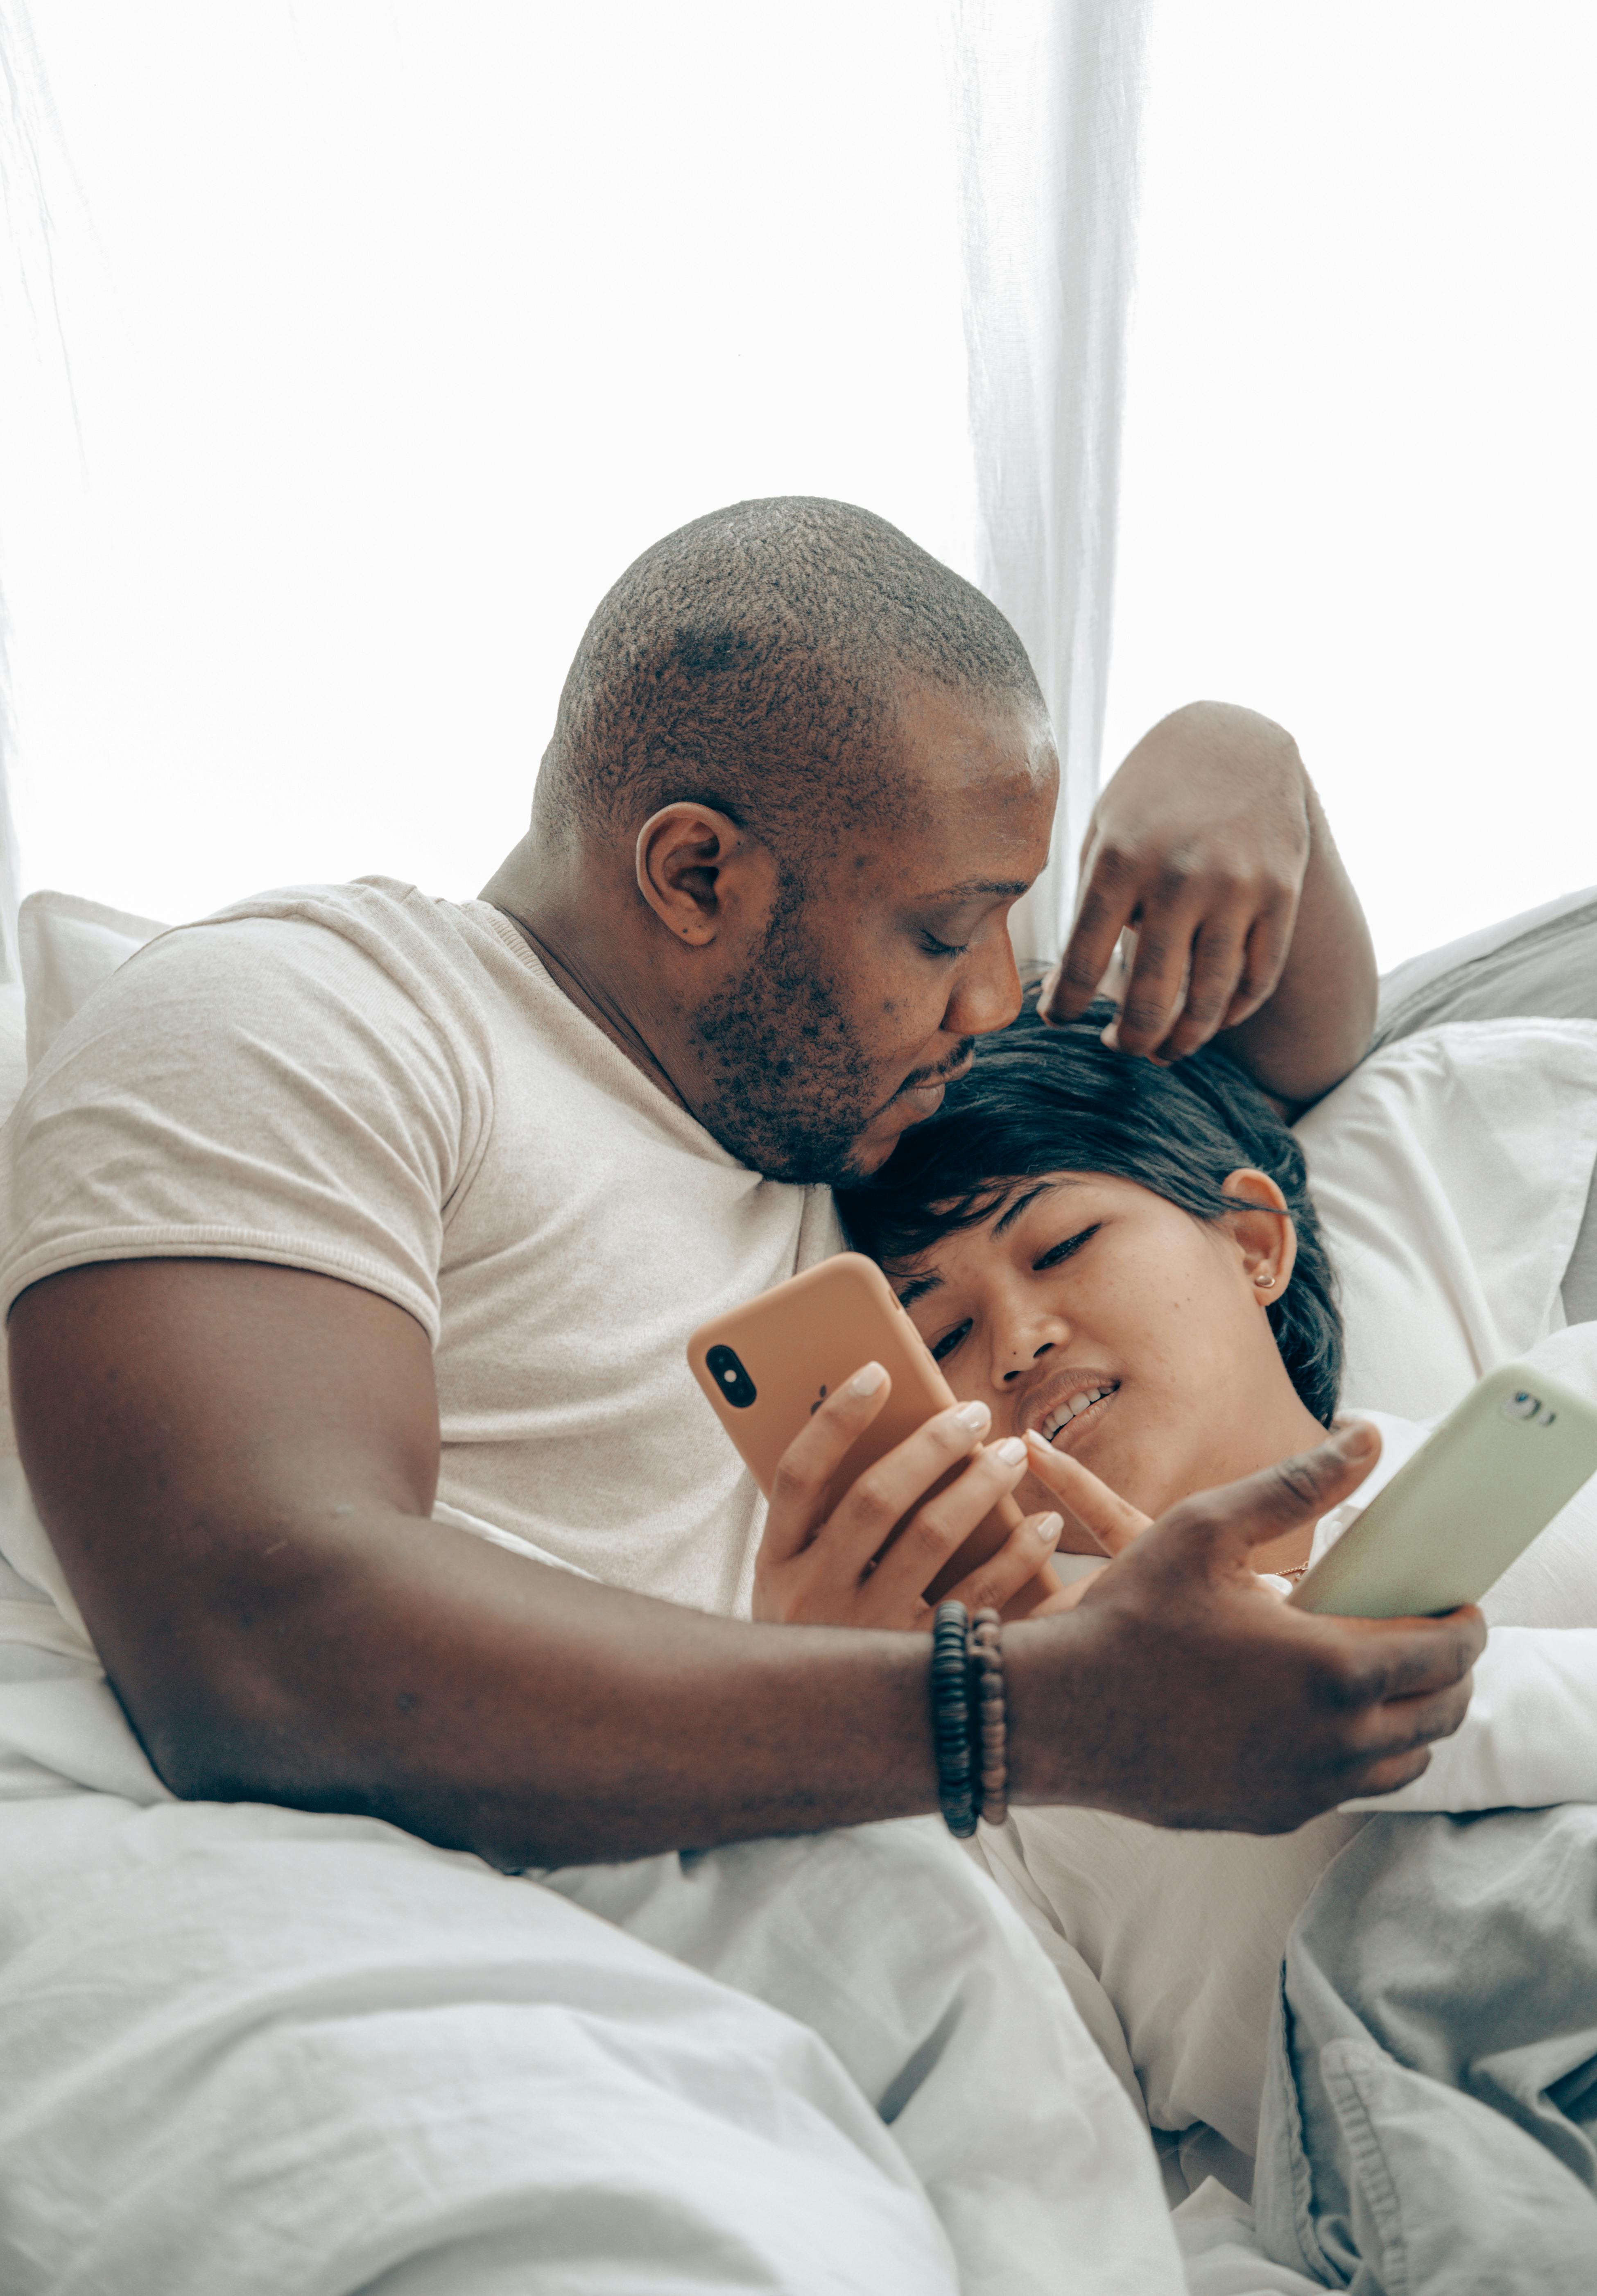 Couple with smartphones in comfortable bed. | Photo: Pexels